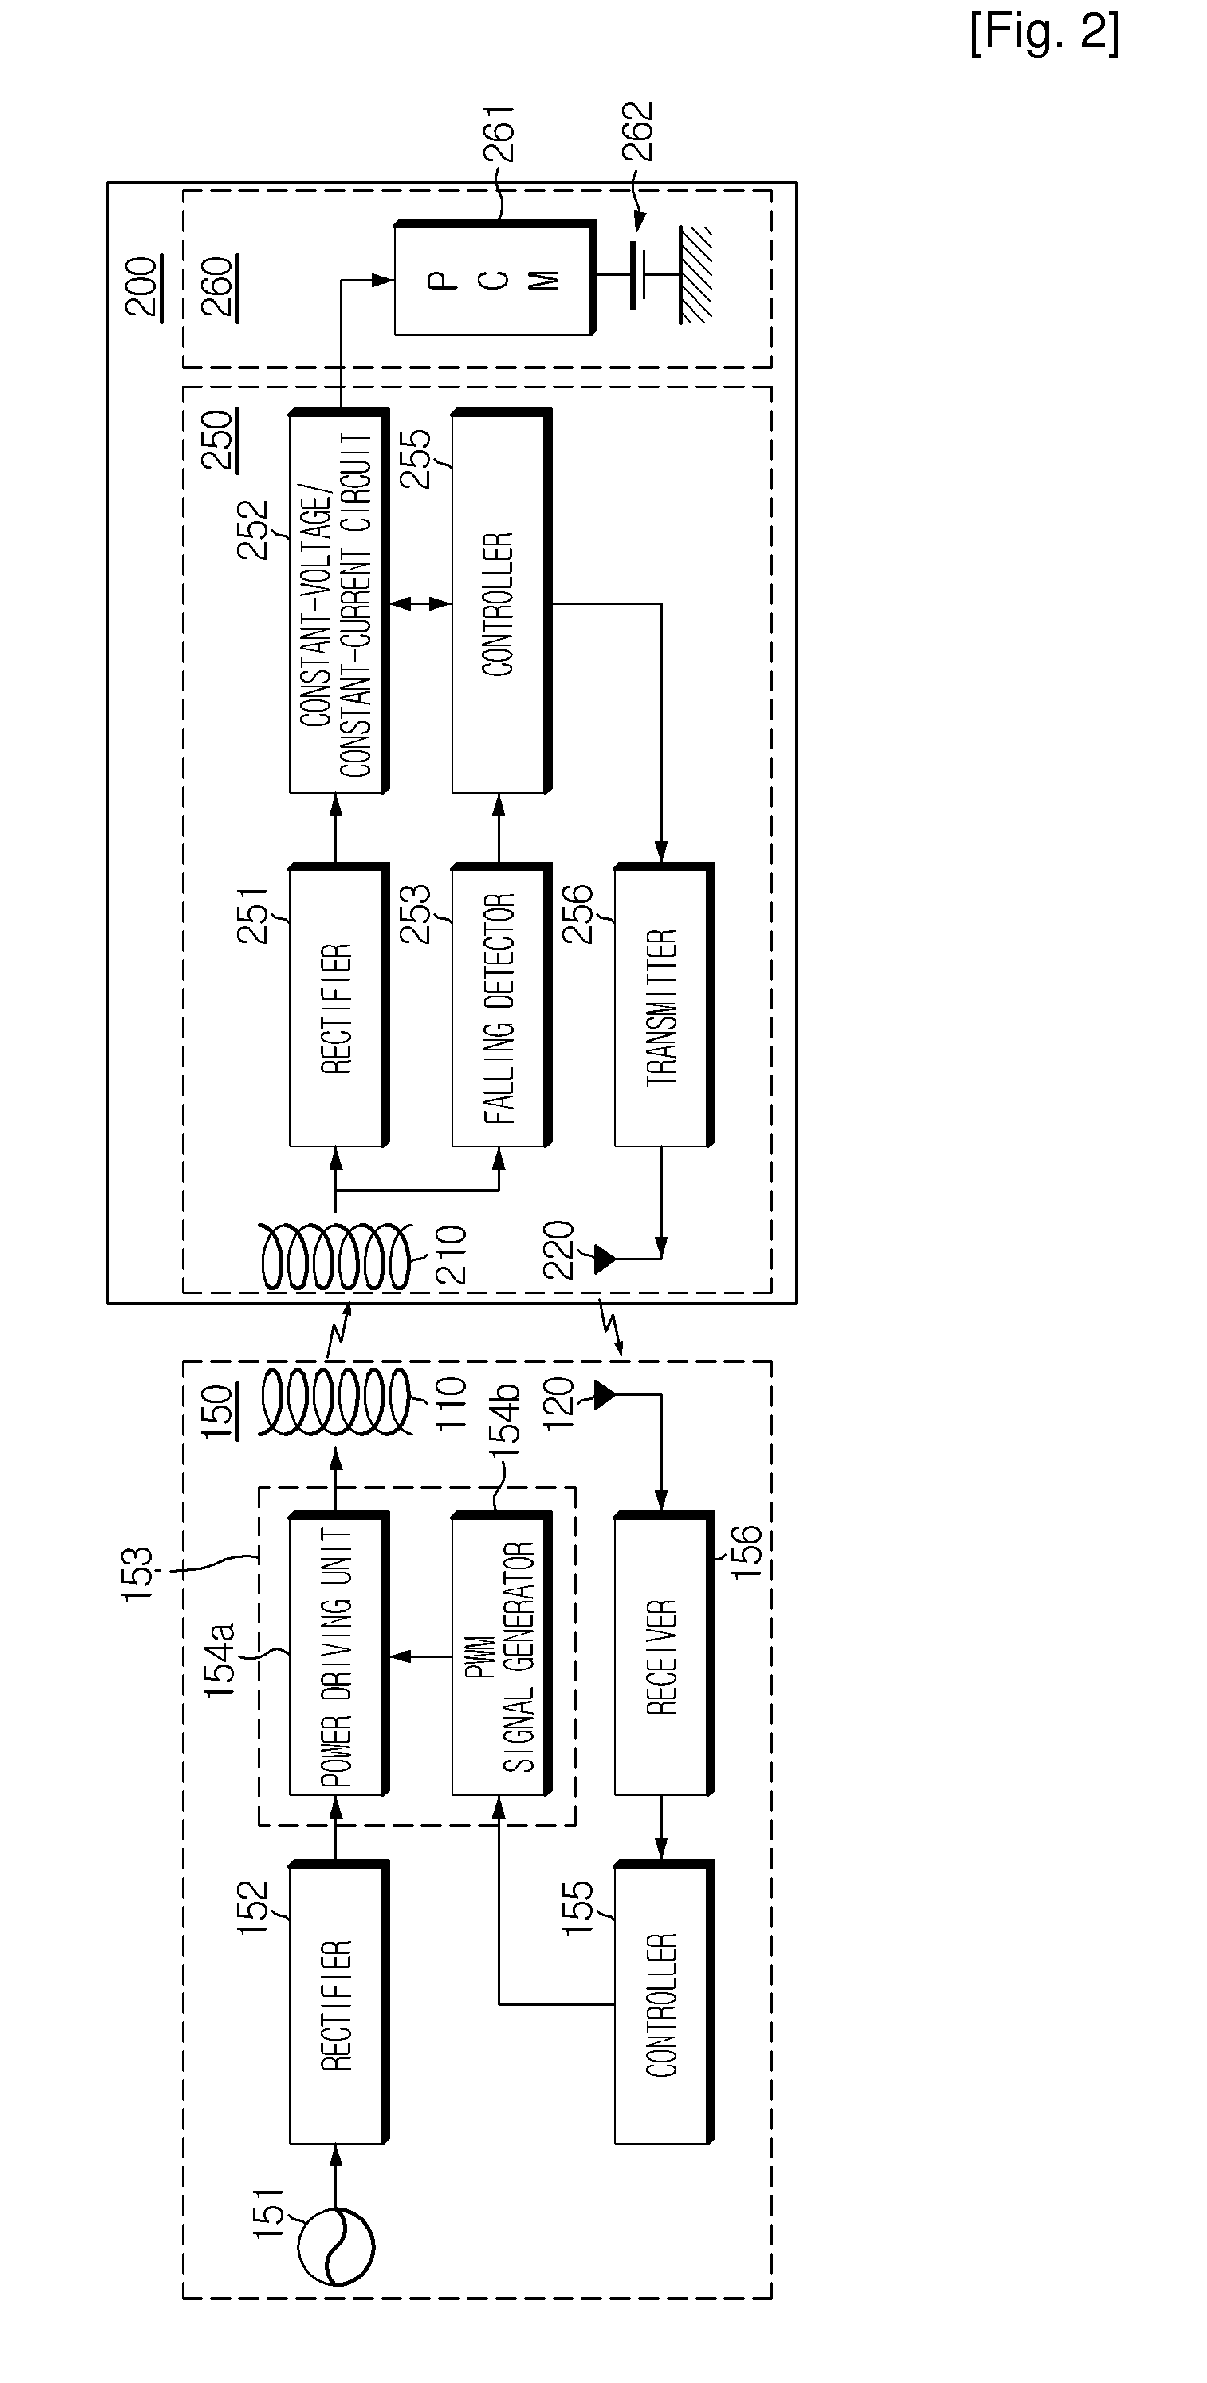 Contactless charging method for charging battery